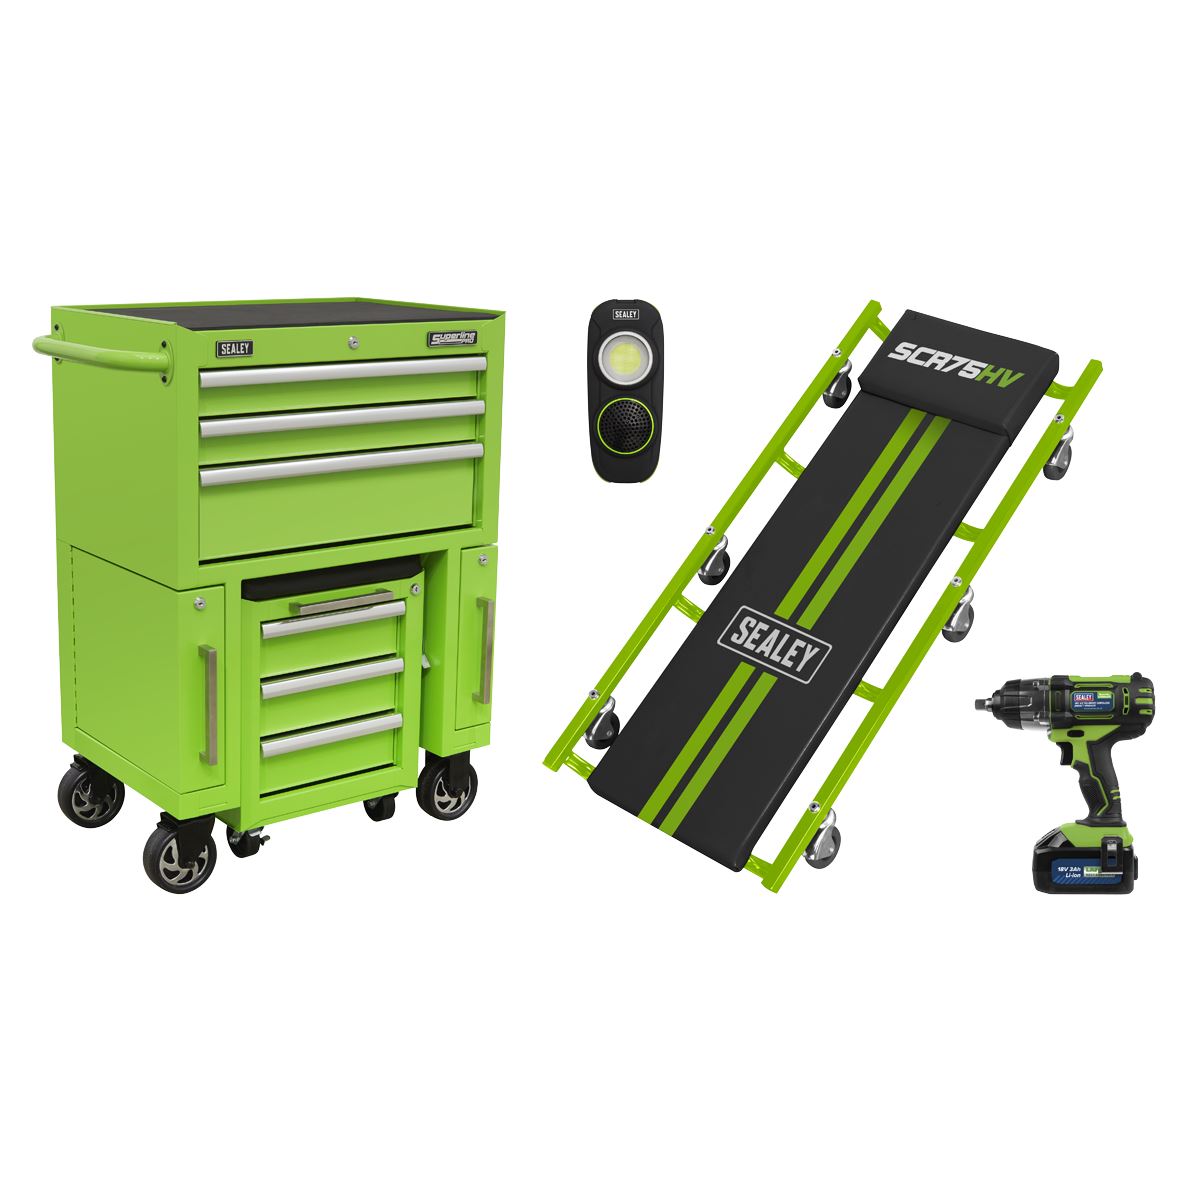 Sealey 4pc Rollcab & Utility Seat Kit with Creeper